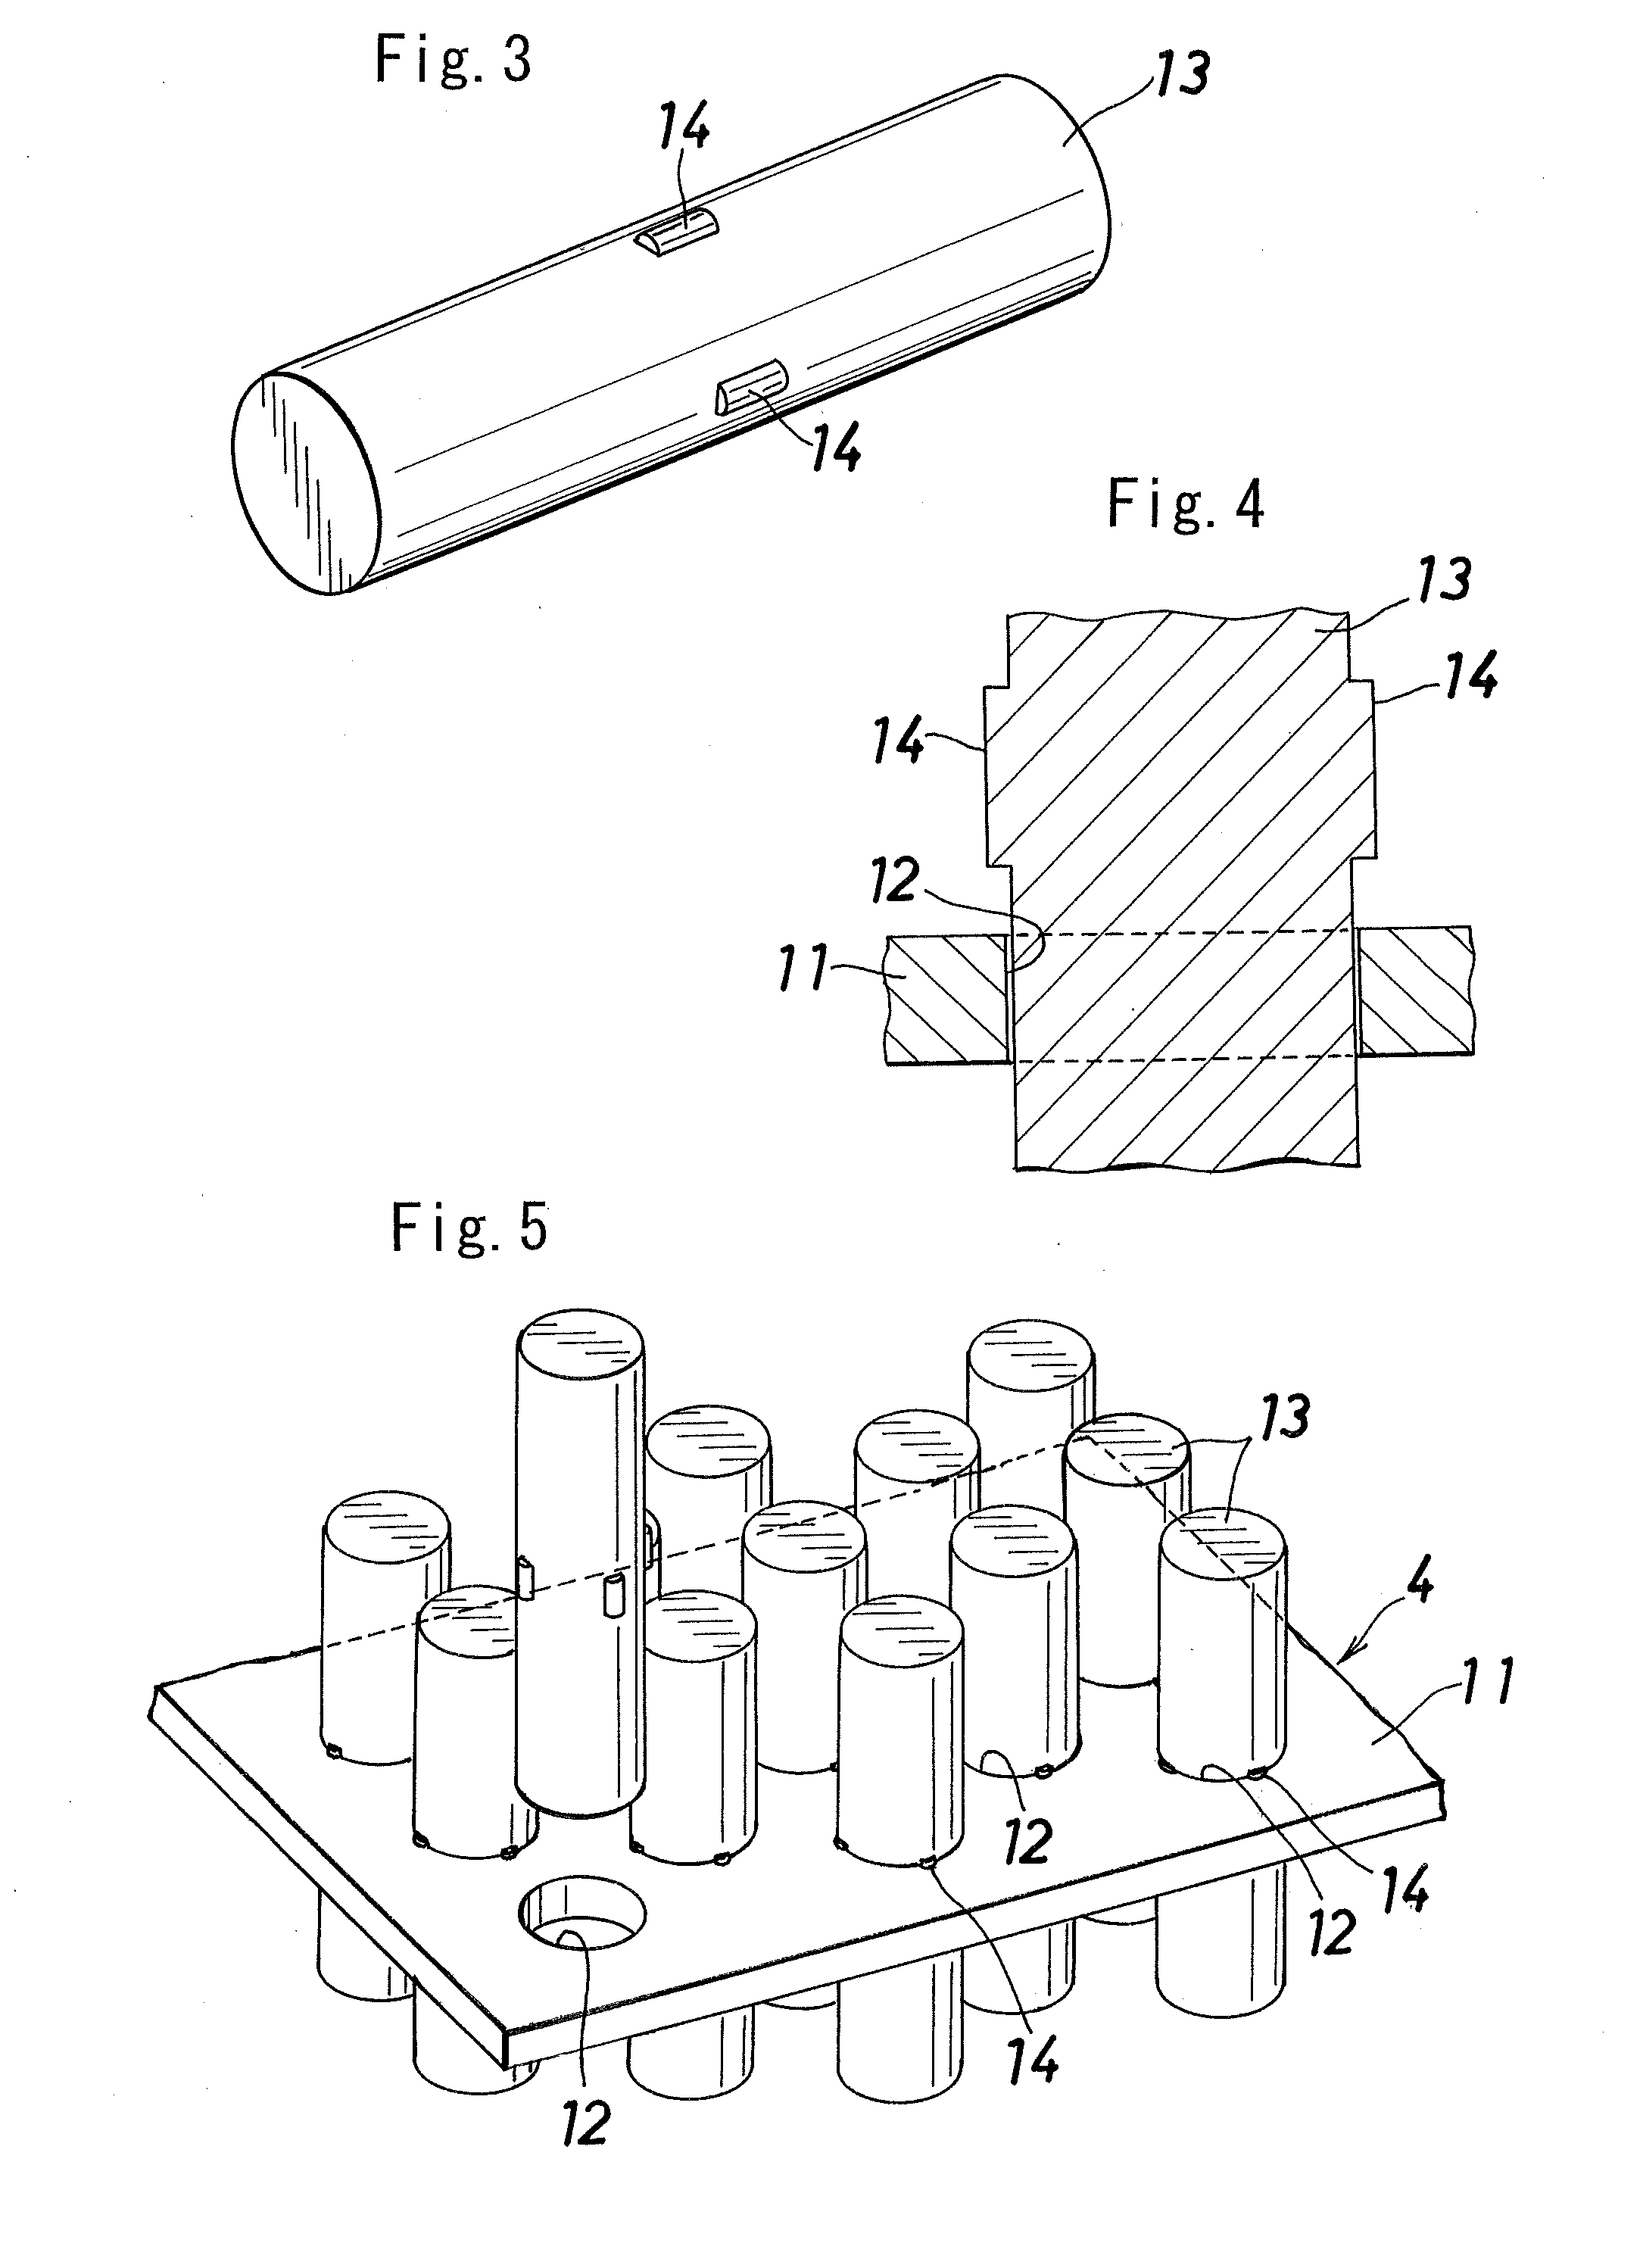 Liquid-cooled-type cooling device and manufacturing method for same